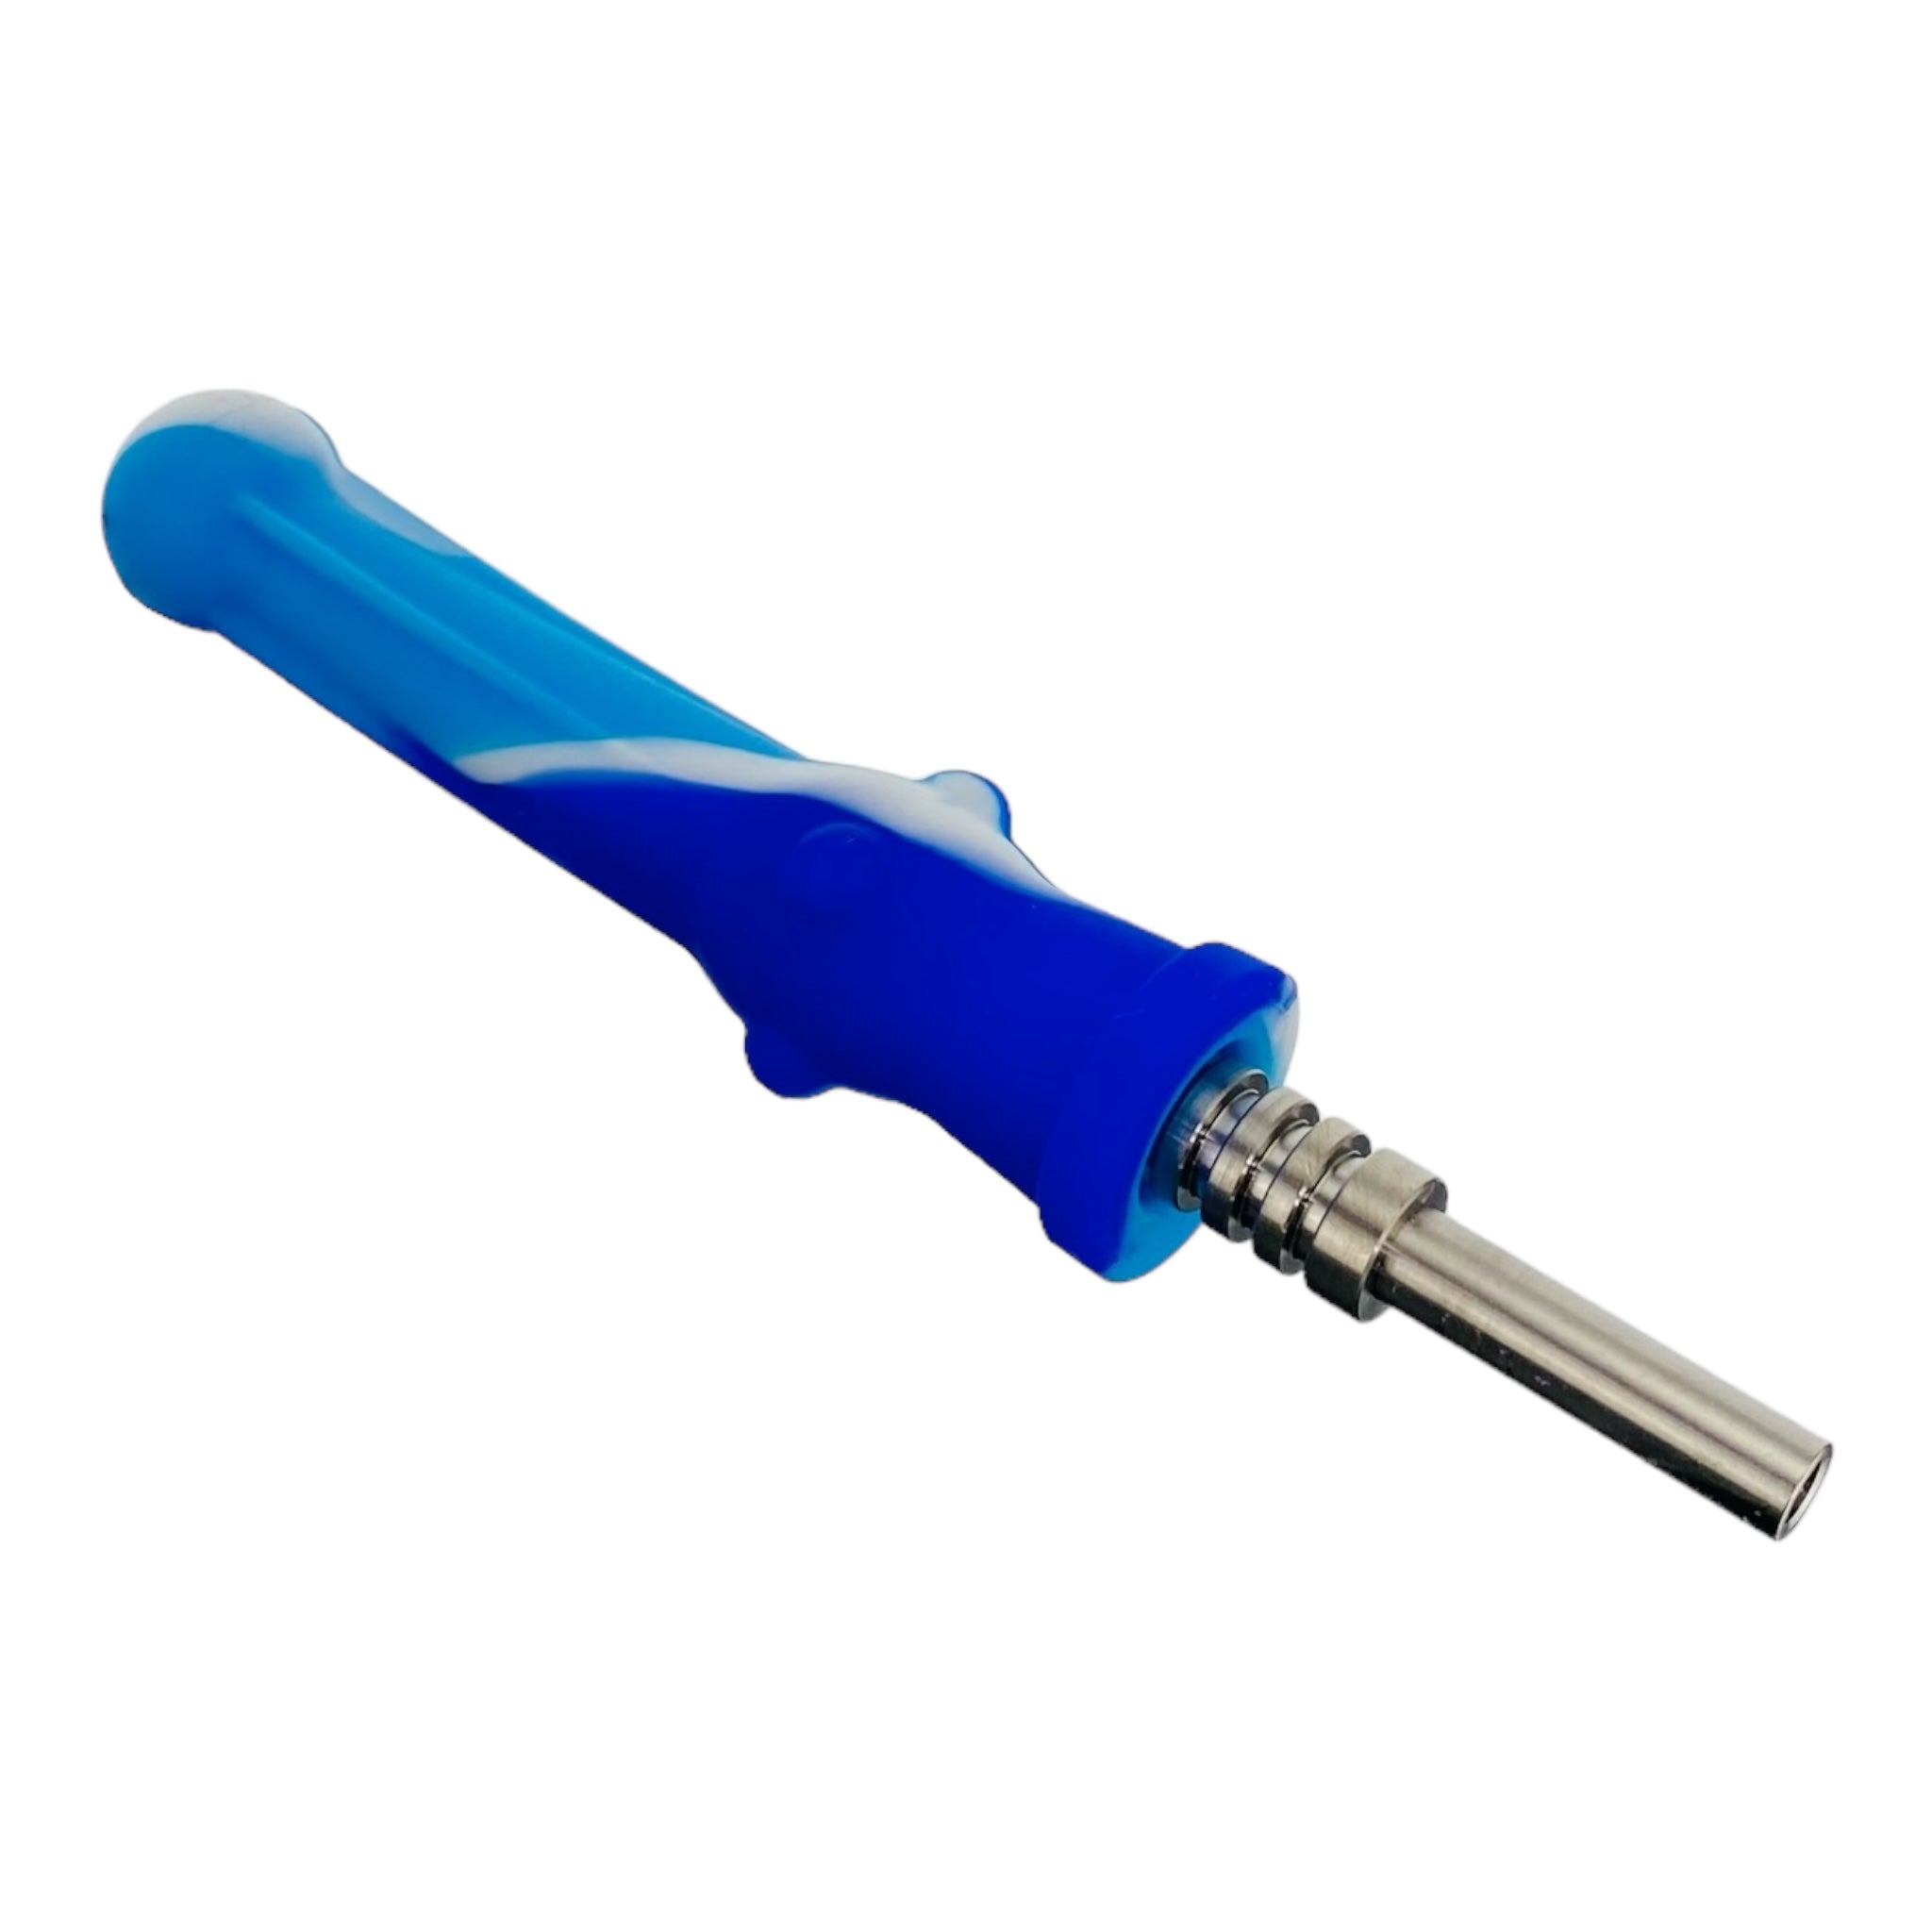 Silicone Nectar Collector With Titanium Tip 14mm Blue, and White